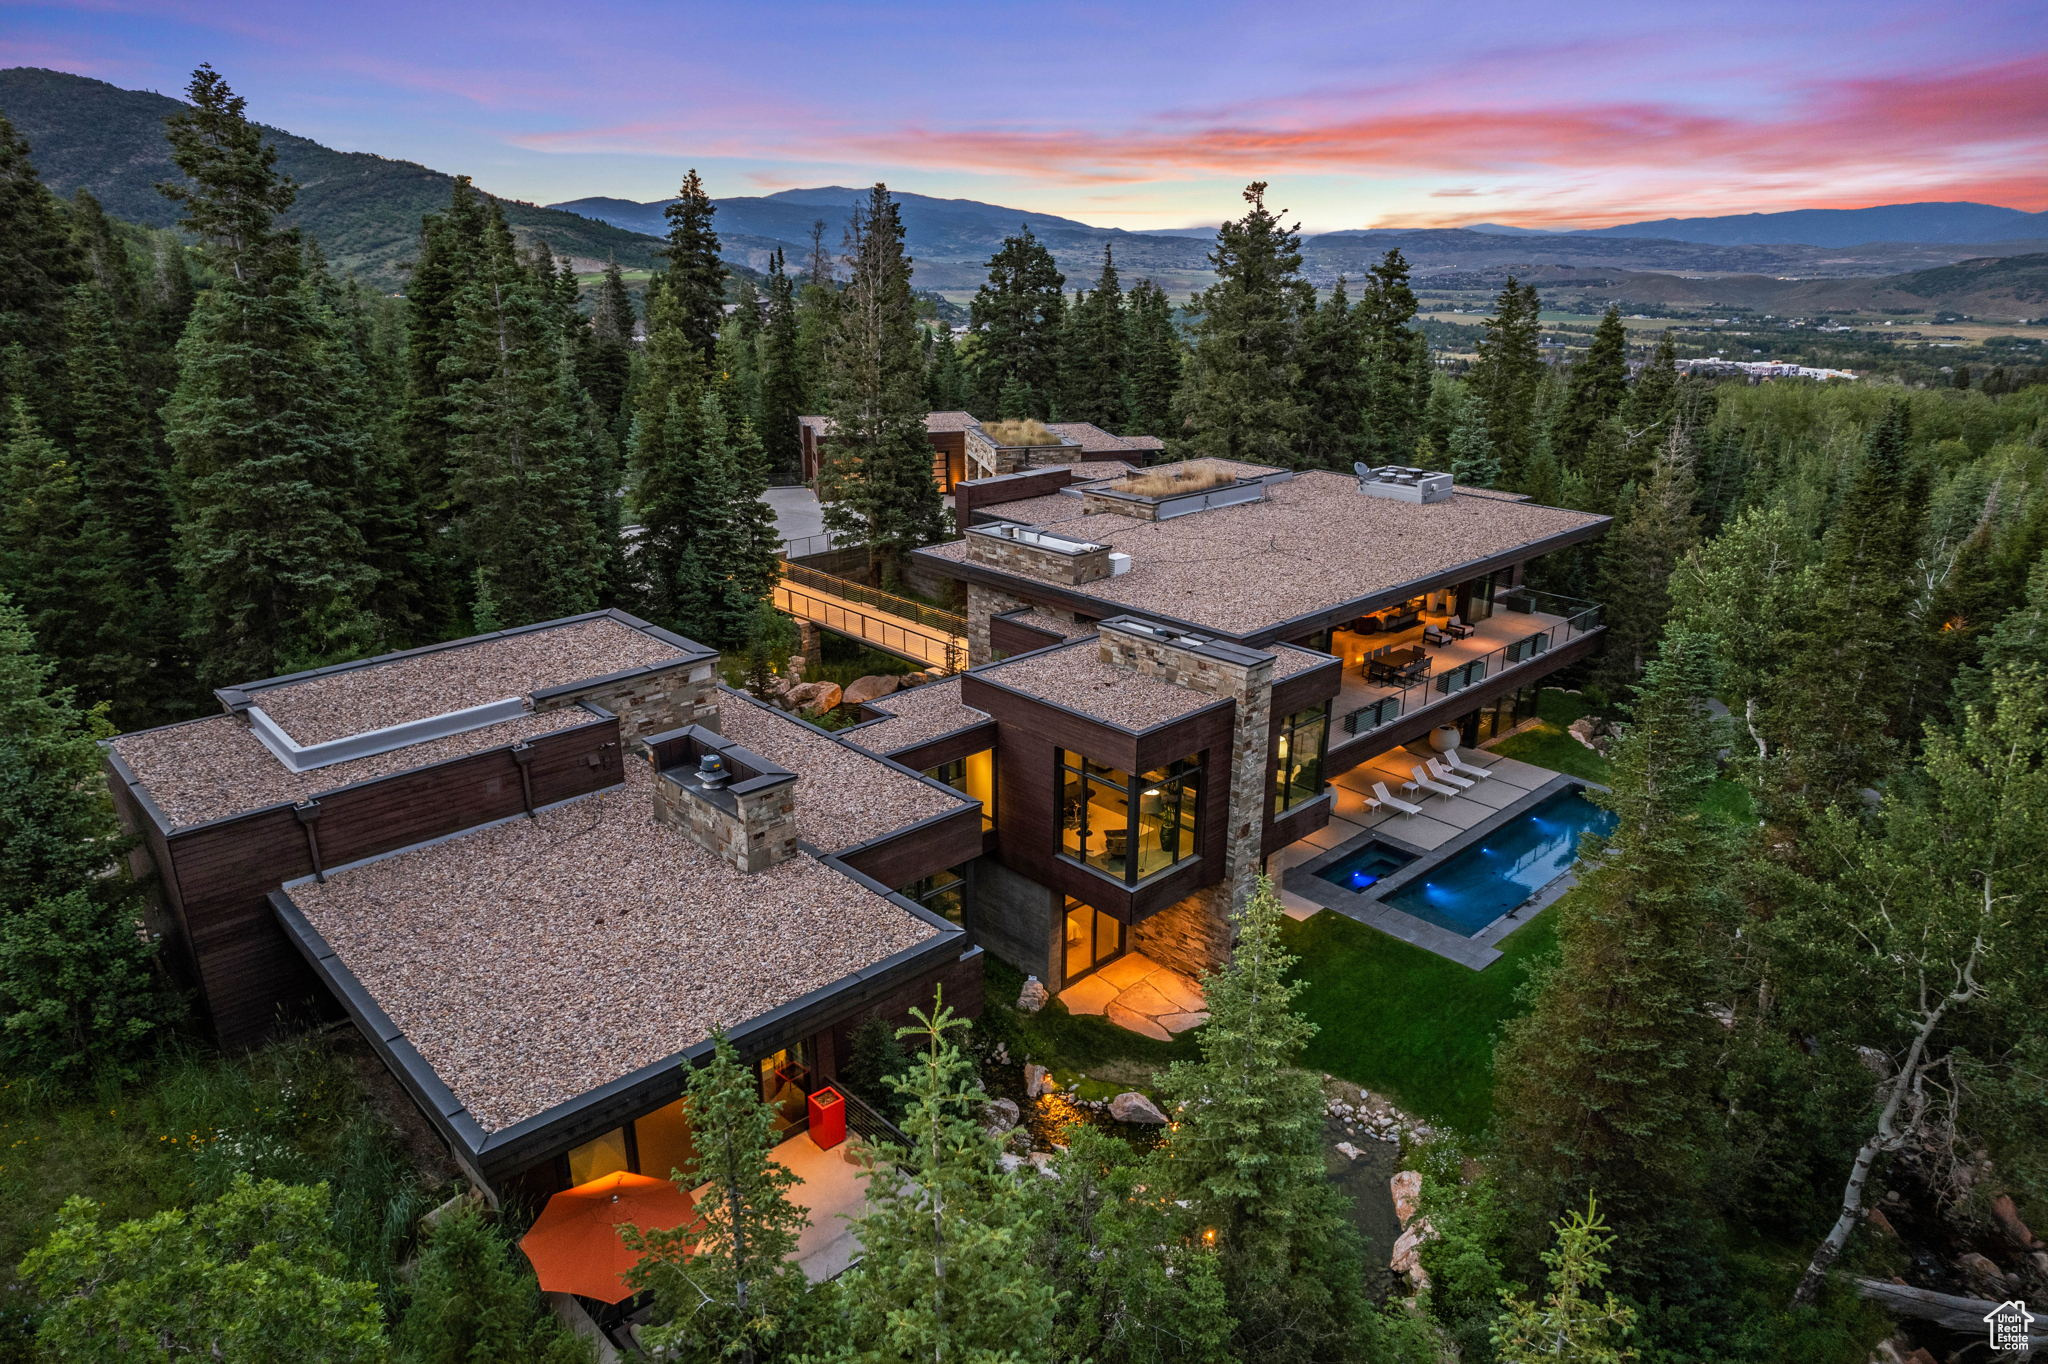 2470 W WHITE PINE, Park City, Utah 84060, 4 Bedrooms Bedrooms, 28 Rooms Rooms,1 BathroomBathrooms,Residential,For sale,WHITE PINE,1990745